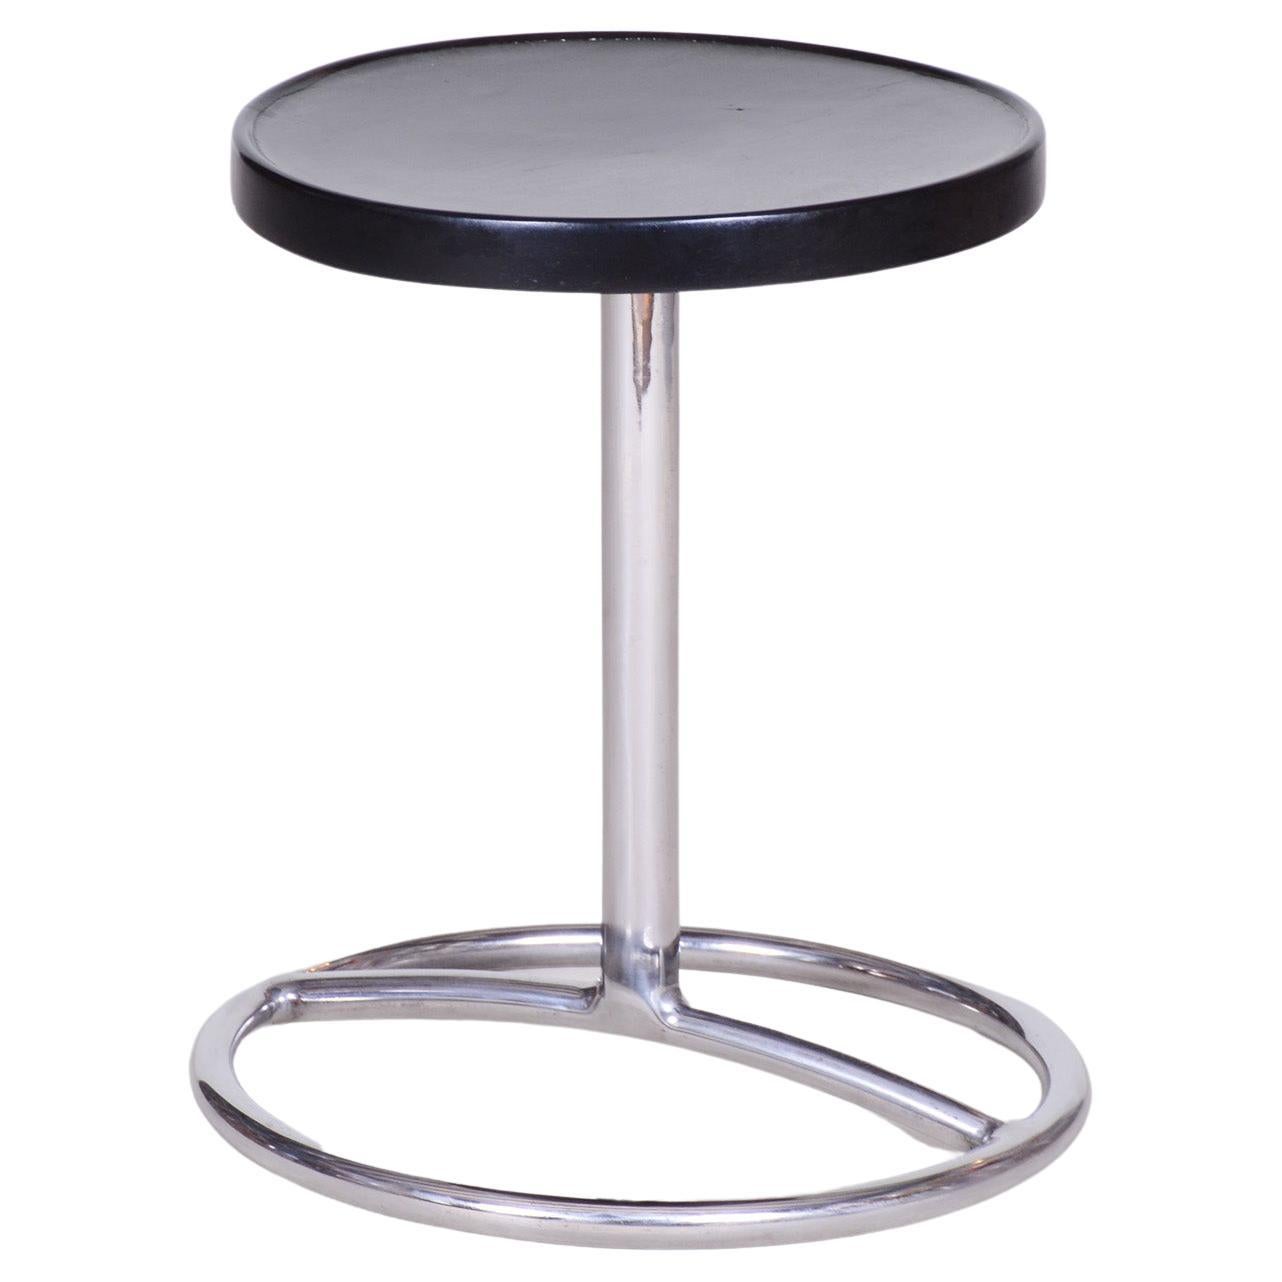 Black Art Deco Round Piano Stool, Fully Restored, 1930s For Sale